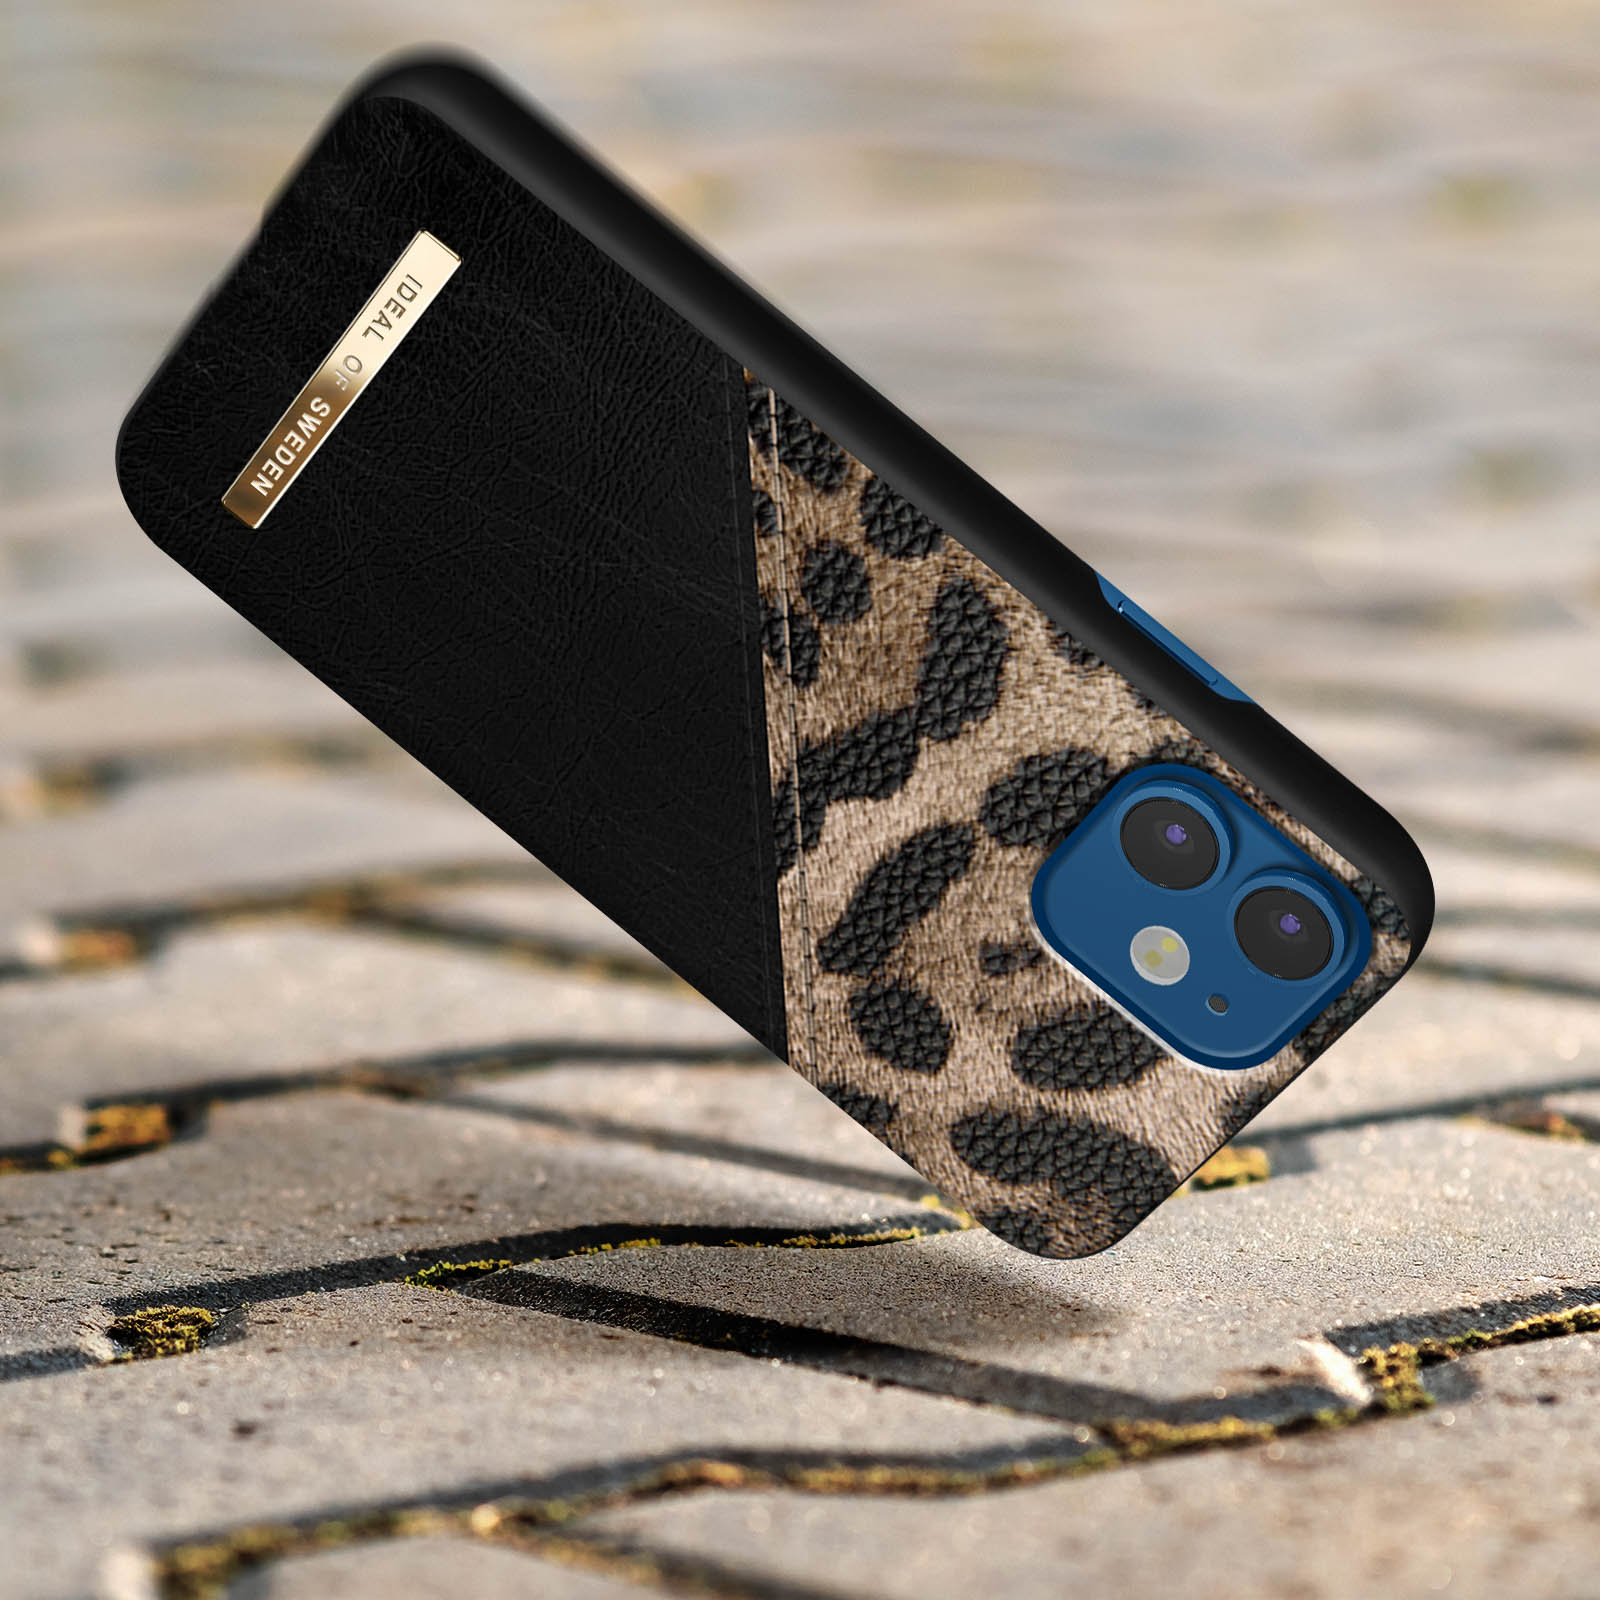 Leopard Pro, Backcover, OF SWEDEN IDEAL IDACAW21-I2061-330, 12/12 Apple, Midnight iPhone